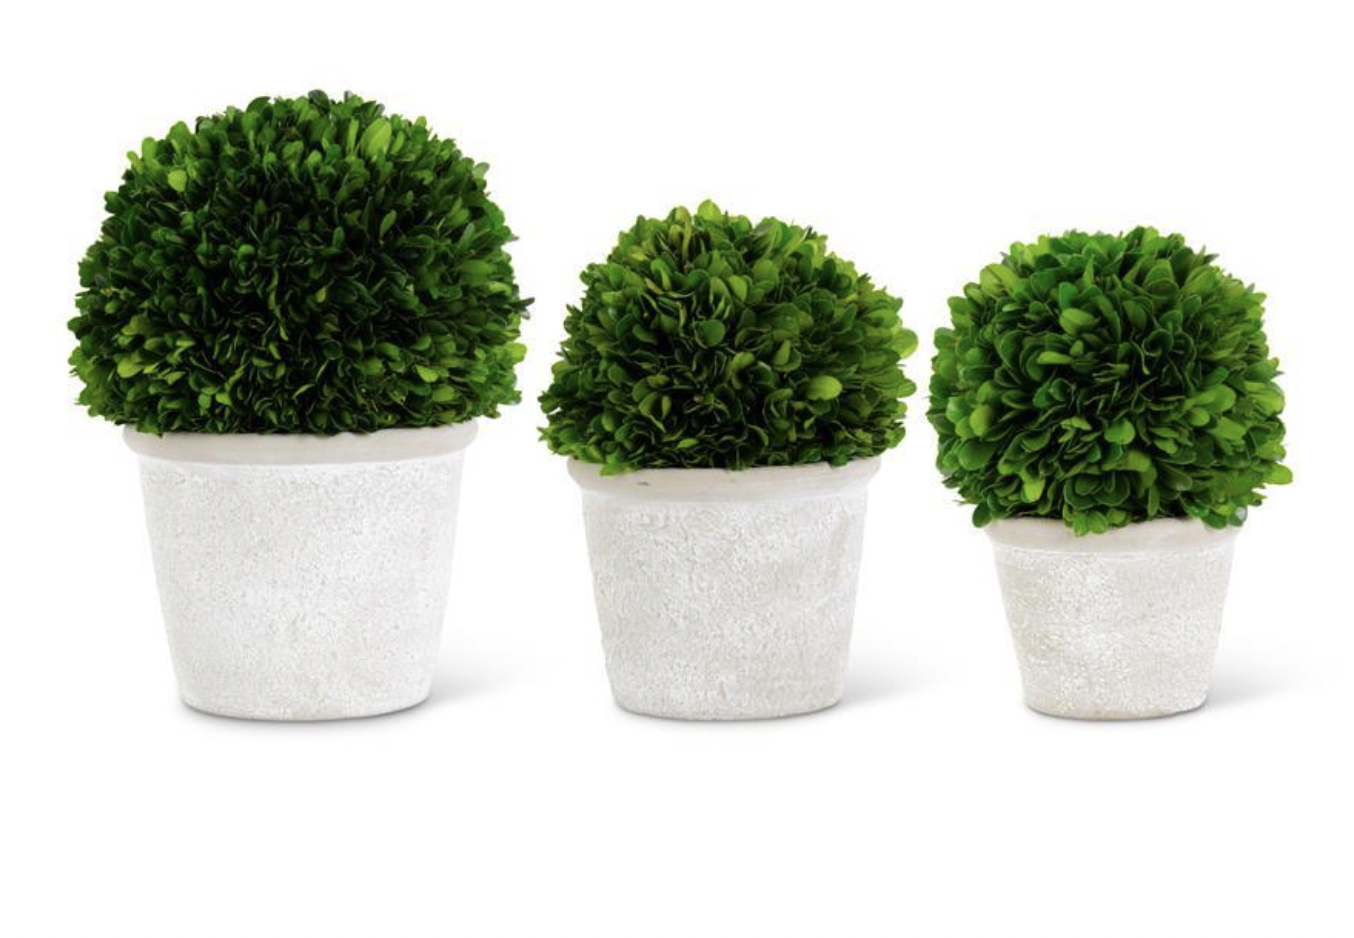 PRESERVED BOXWOOD BALLS IN POTS